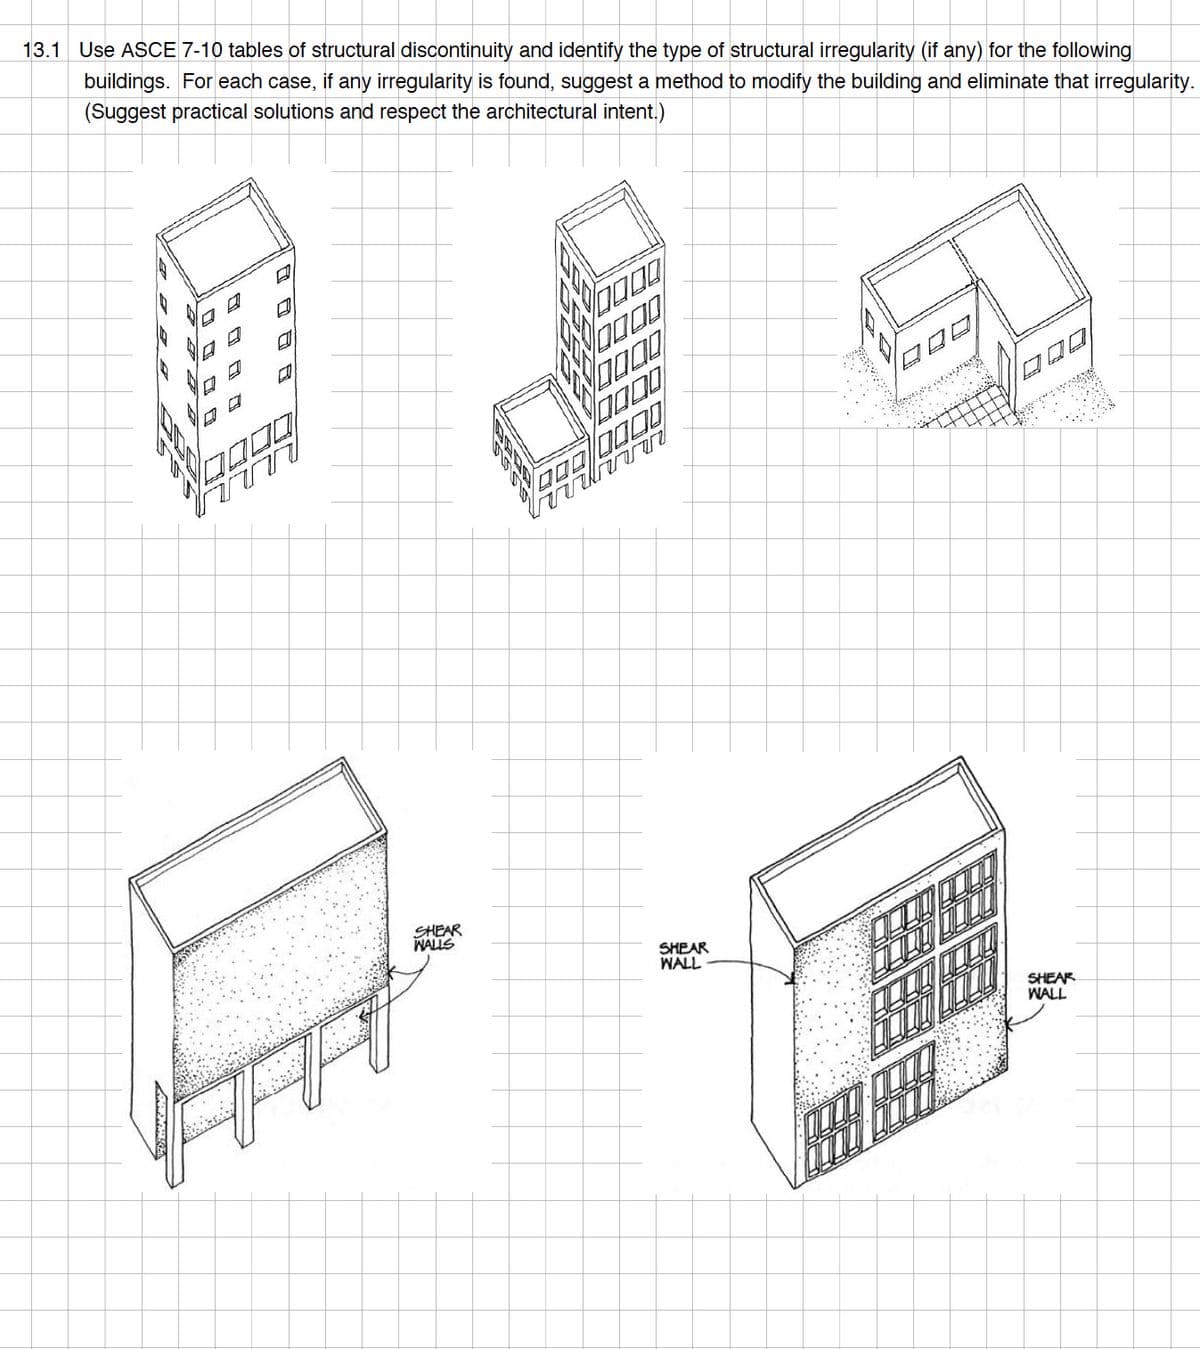 13.1 Use ASCE 7-10 tables of structural discontinuity and identify the type of structural irregularity (if any) for the following
buildings. For each case, if any irregularity is found, suggest a method to modify the building and eliminate that irregularity.
(Suggest practical solutions and respect the architectural intent.)
AR
SHEAR
WALLS
7000
0000
700 0000
SHEAR
WALL
008
SHEAR
WALL